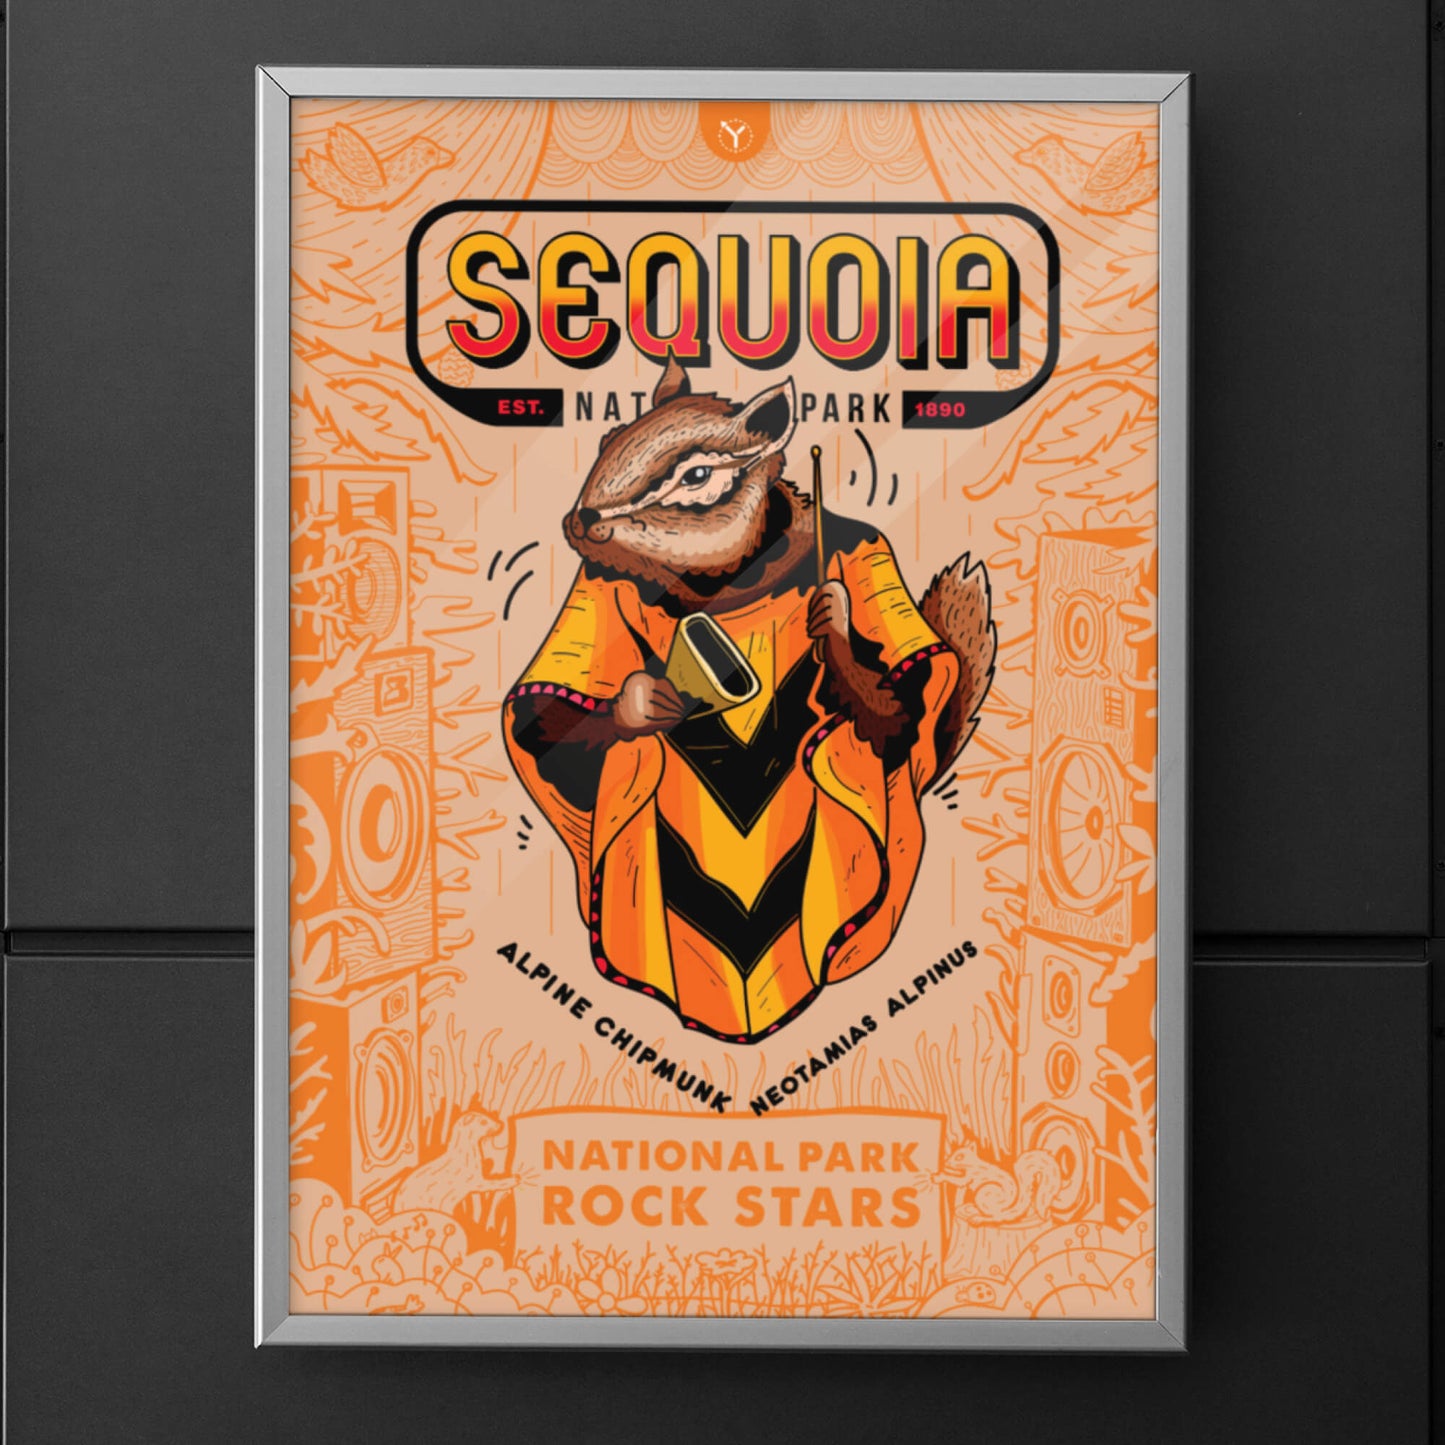 Music Poster of Sequoia National Park with Chipmunk playing the cowbell.